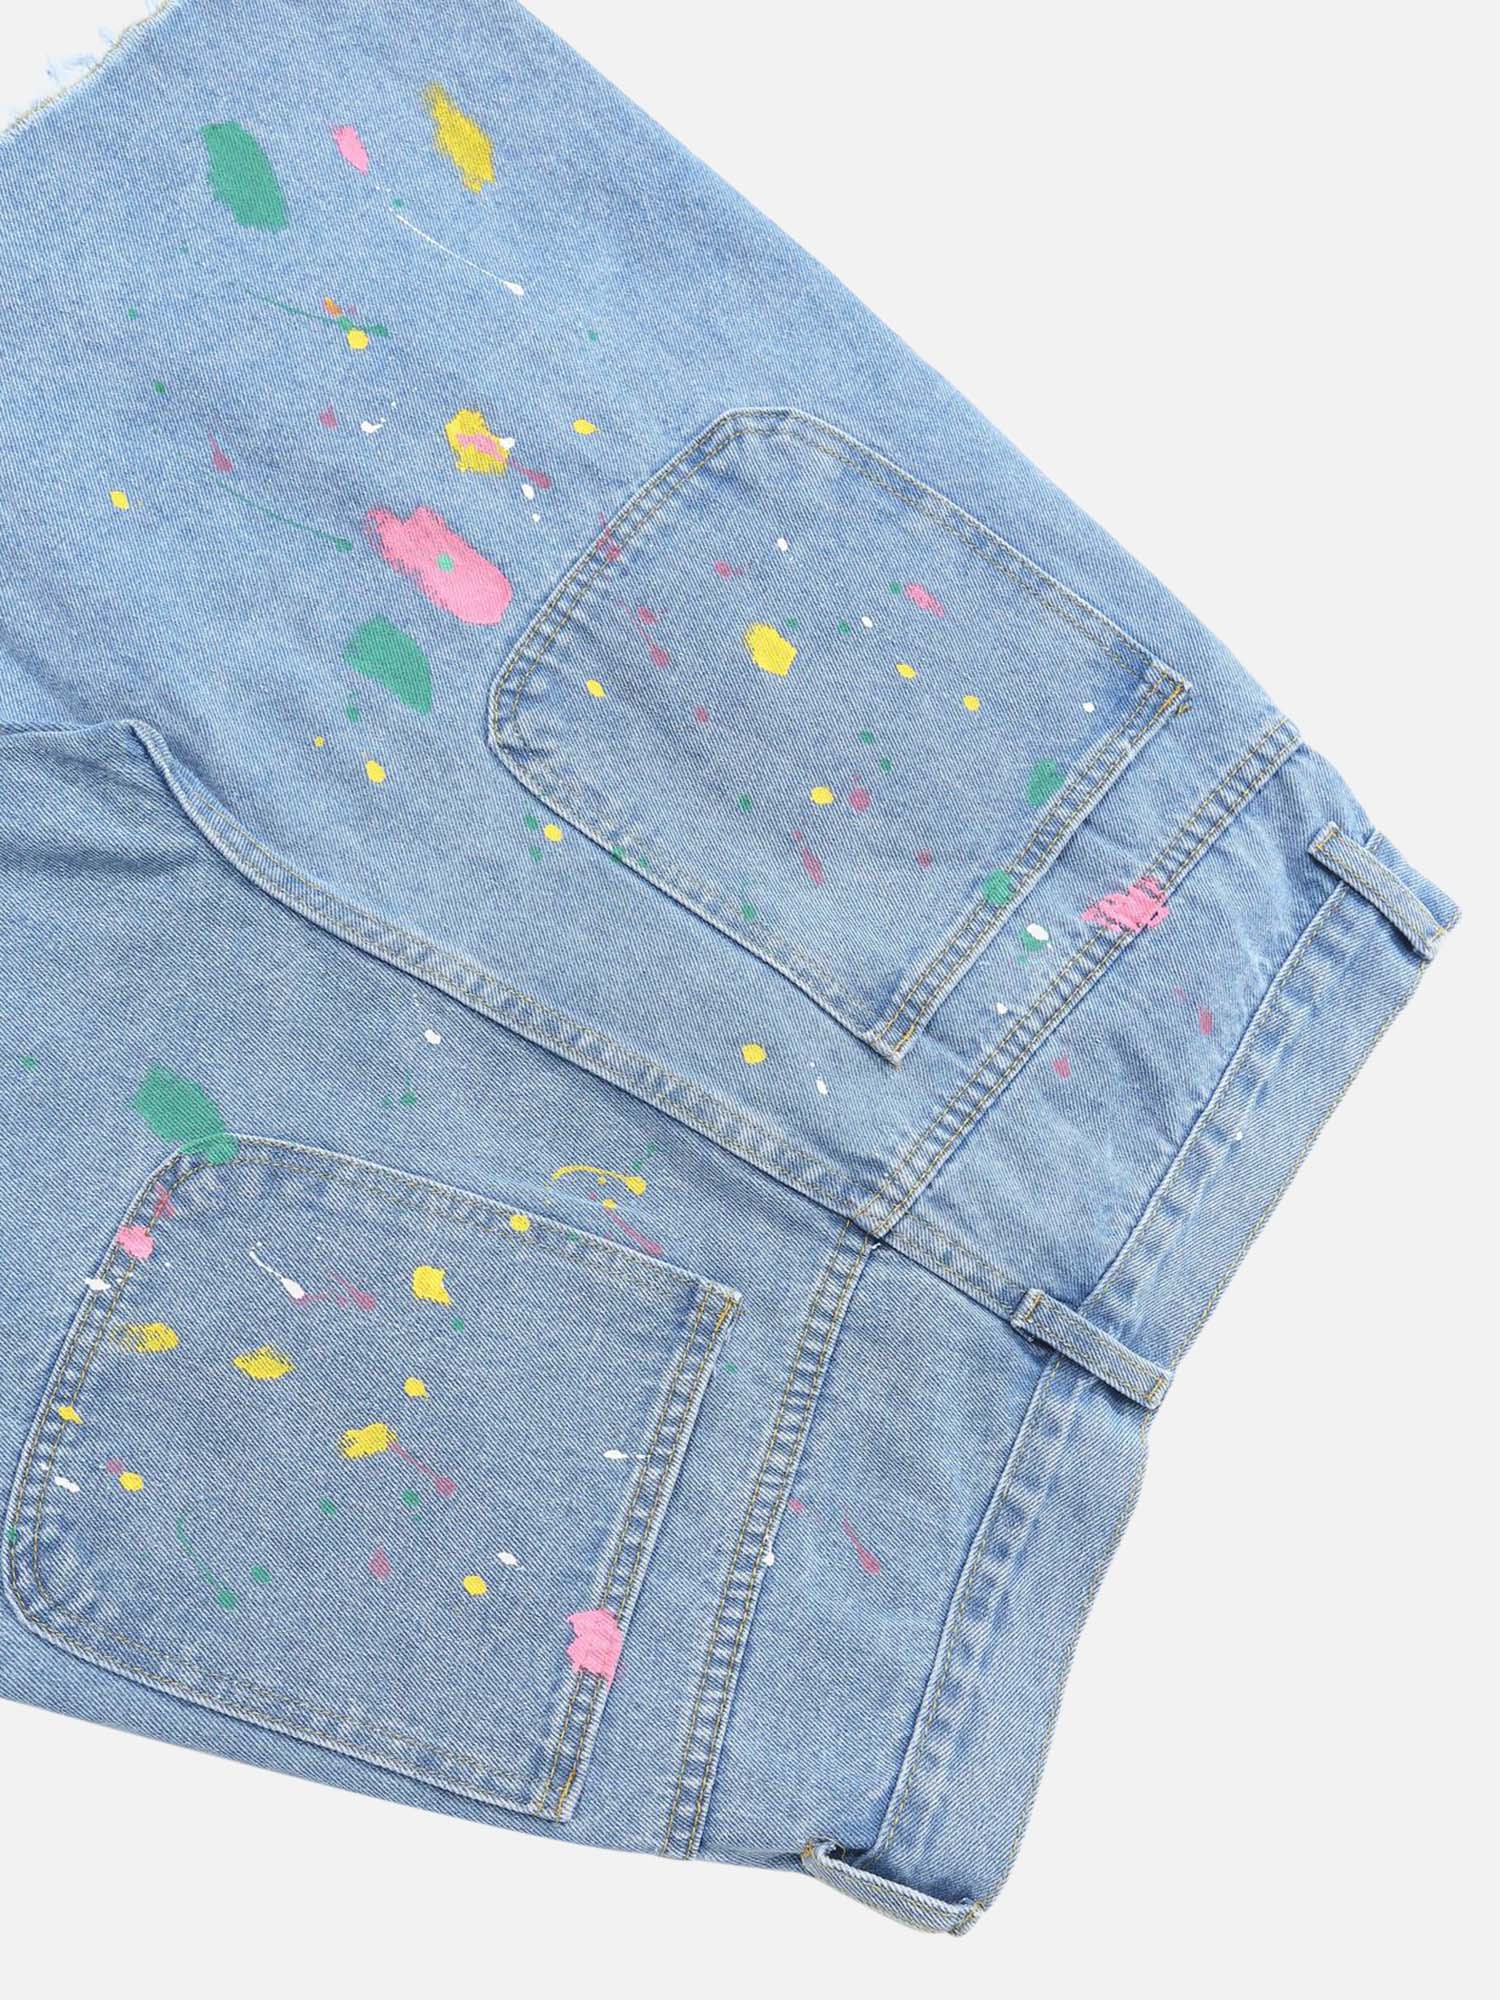 American Street Patch Flower Embroidered Cat Whiskers Denim Shorts Jorts